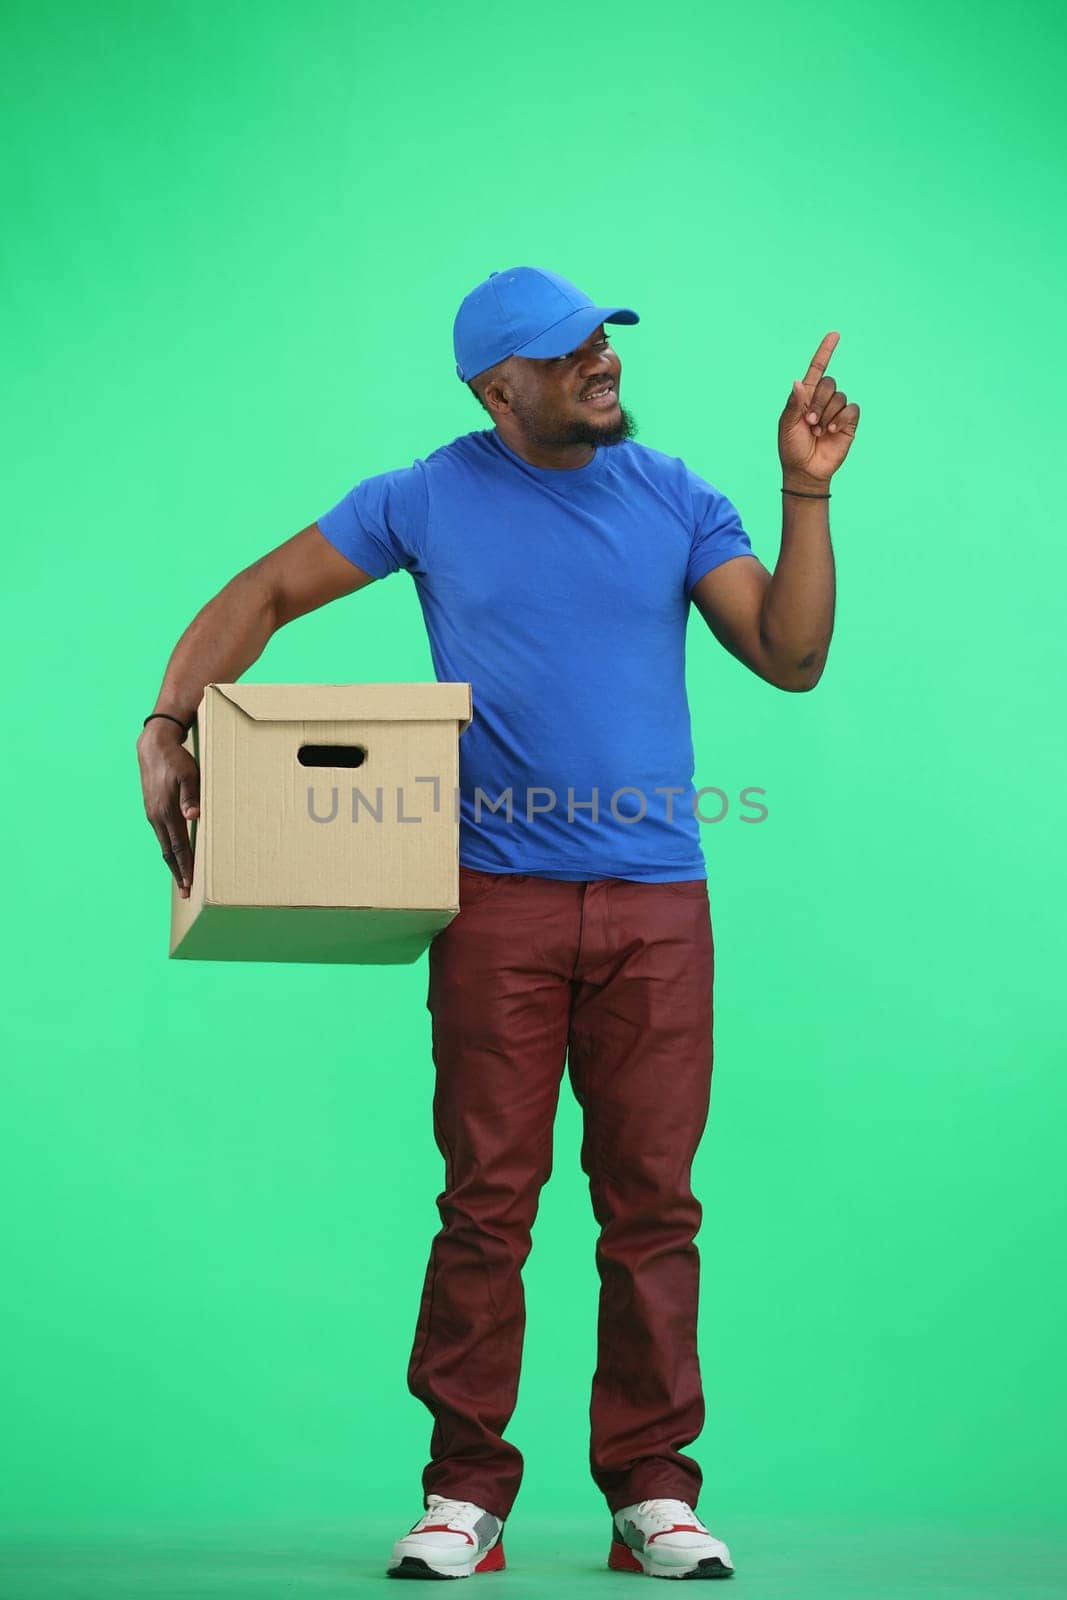 The deliveryman, in full height, on a green background, with a box, points to the side by Prosto